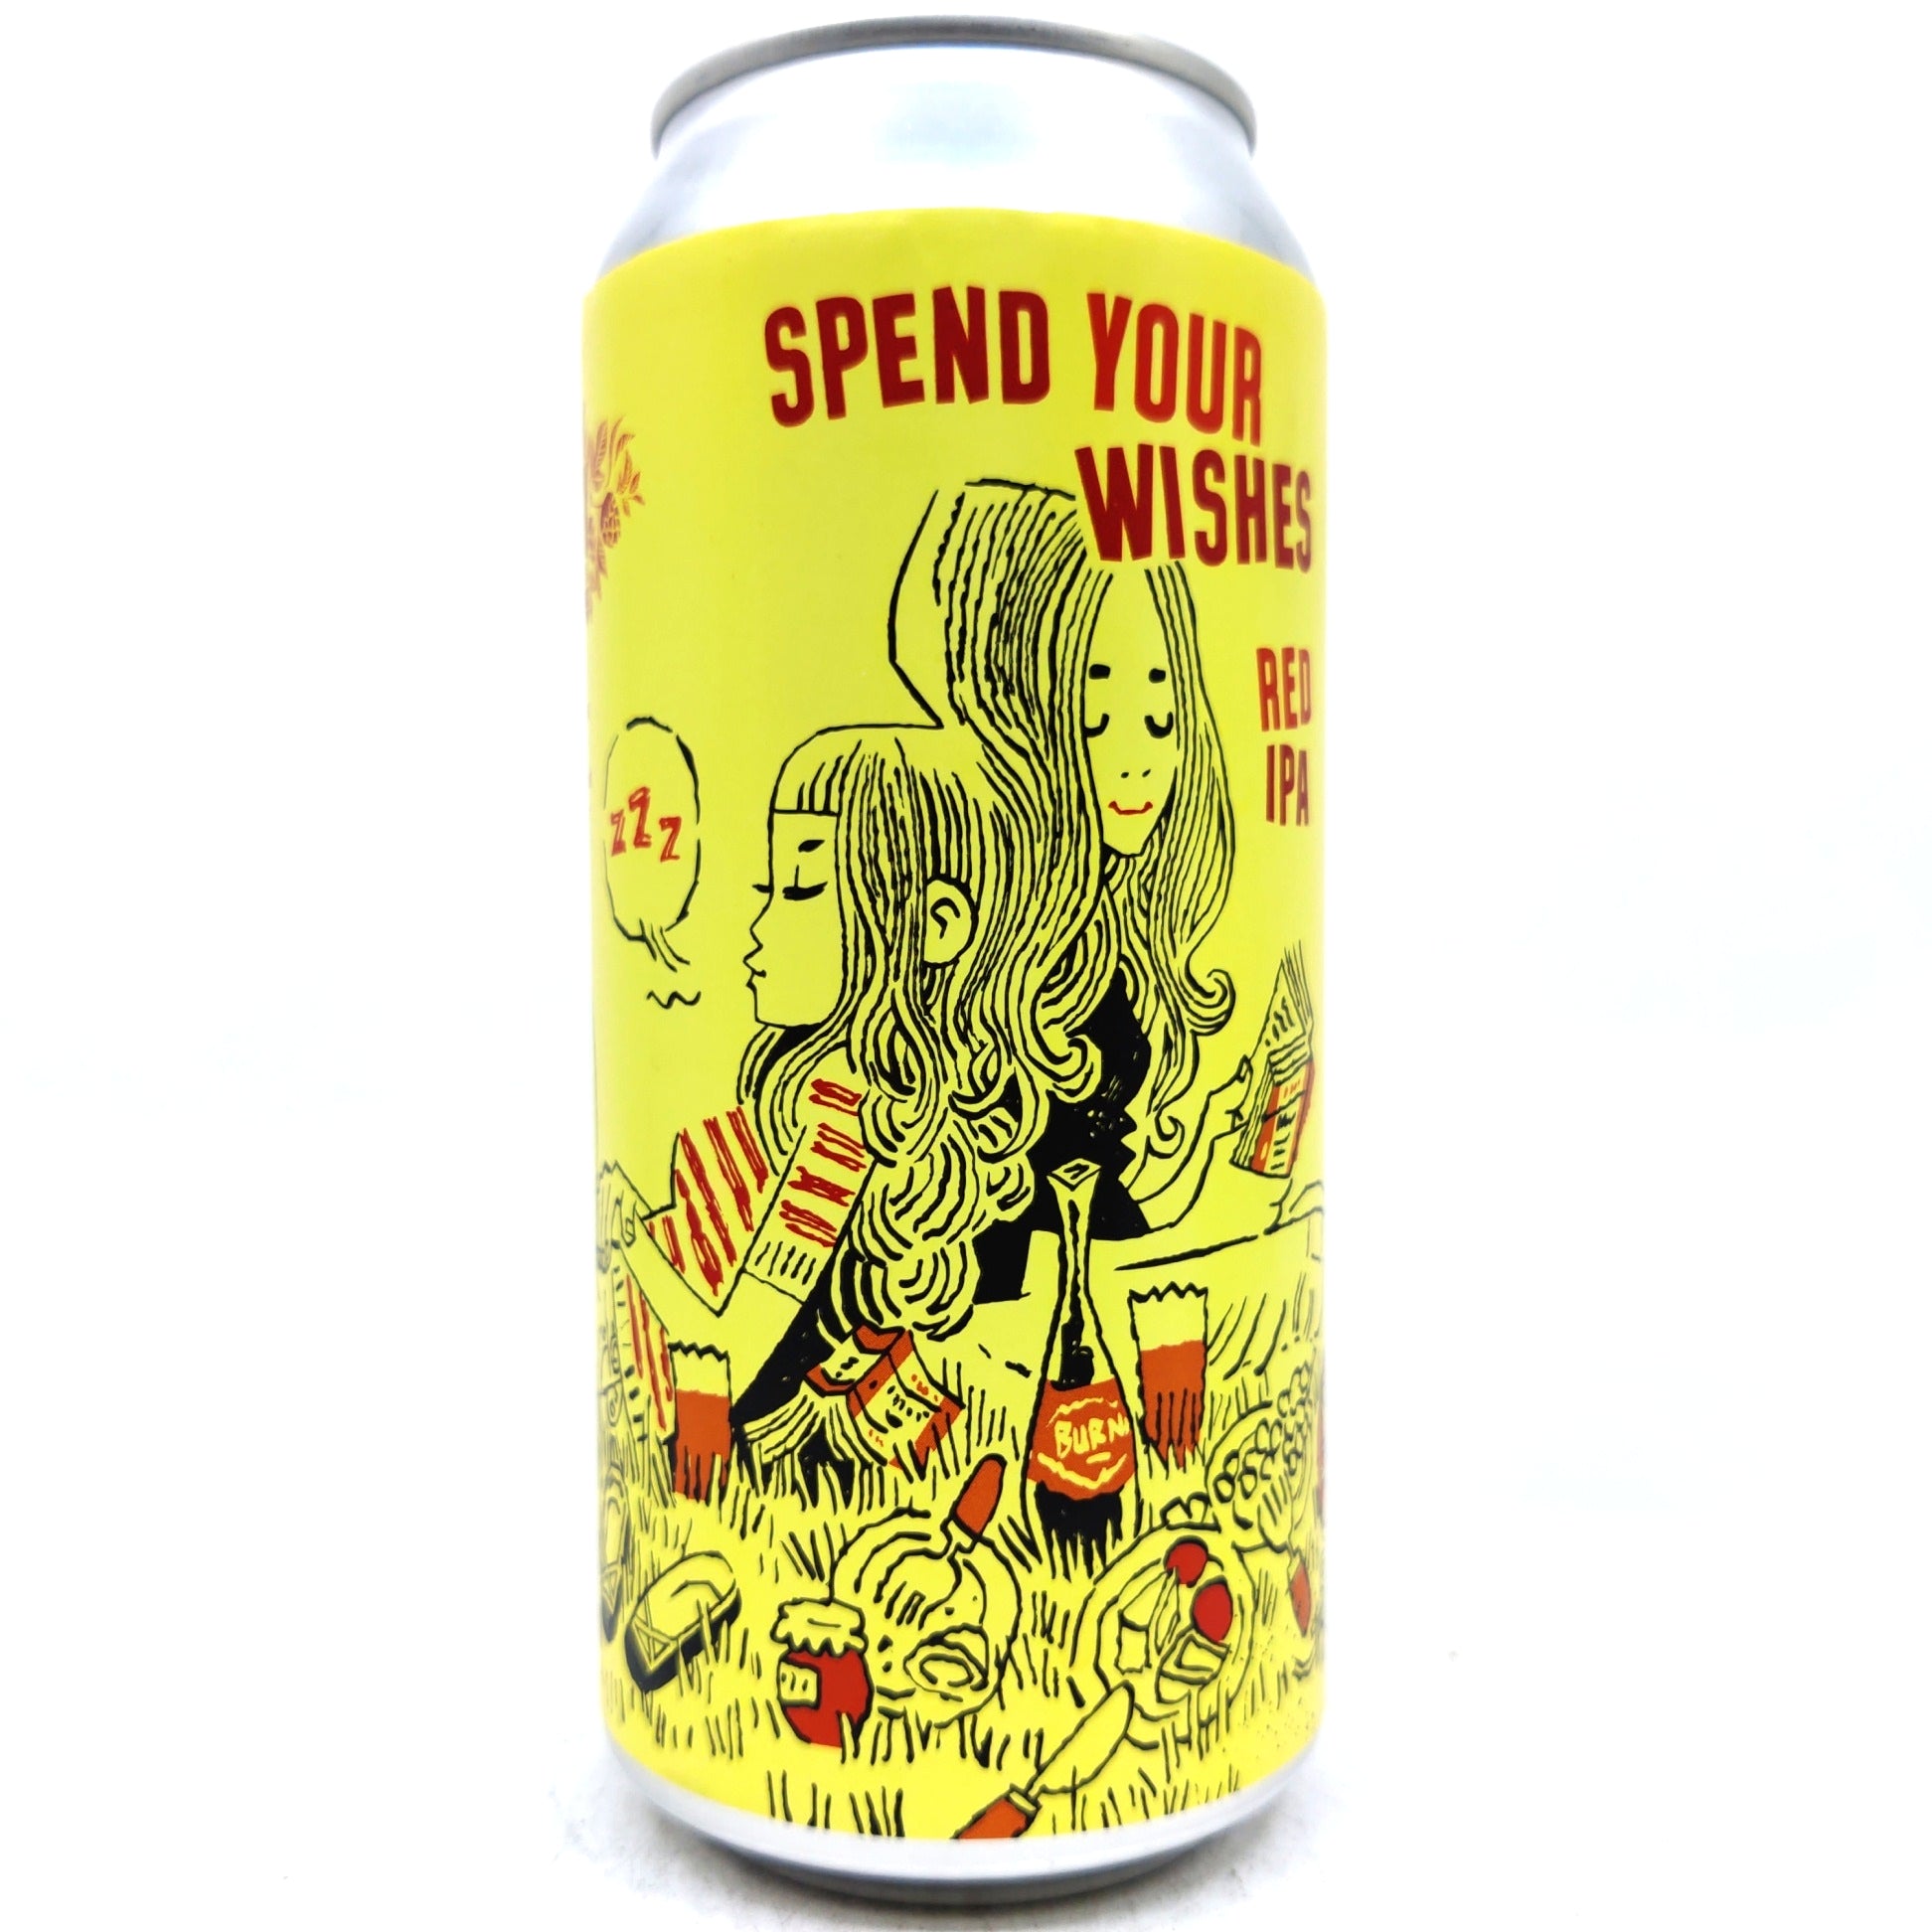 Burning Sky x Elusive Spend Your Wishes Red IPA 6.5% (440ml can)-Hop Burns & Black